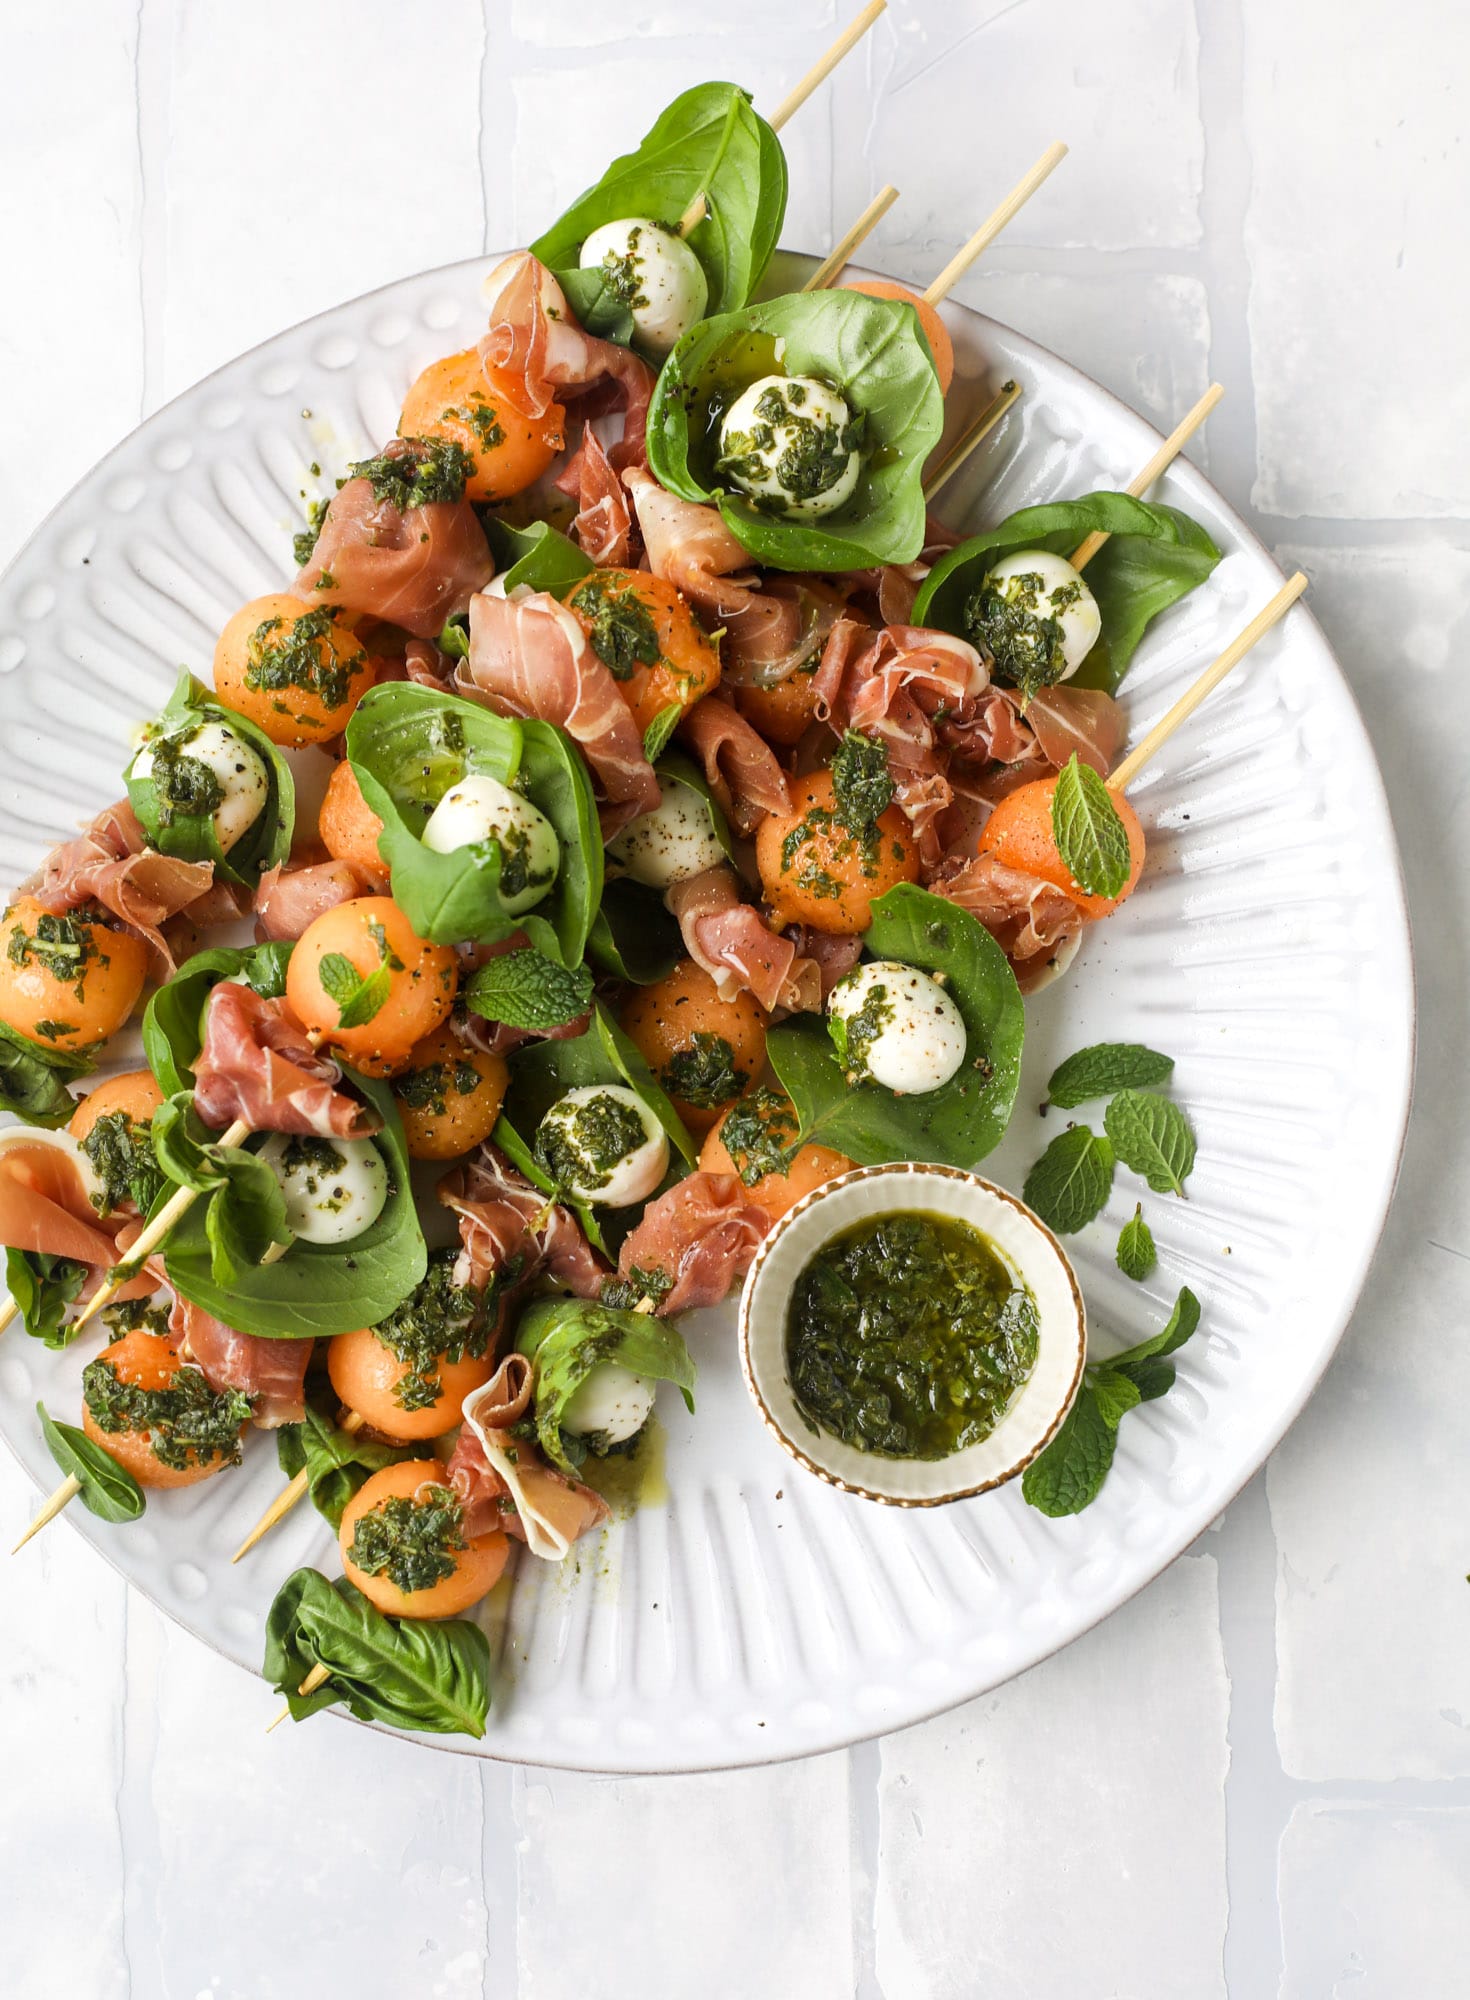 These cantaloupe prosciutto skewers are the perfect cantoloupe caprese snack! Salty prosciutto, sweet melon and fresh mozzarella drizzled with mint pesto!